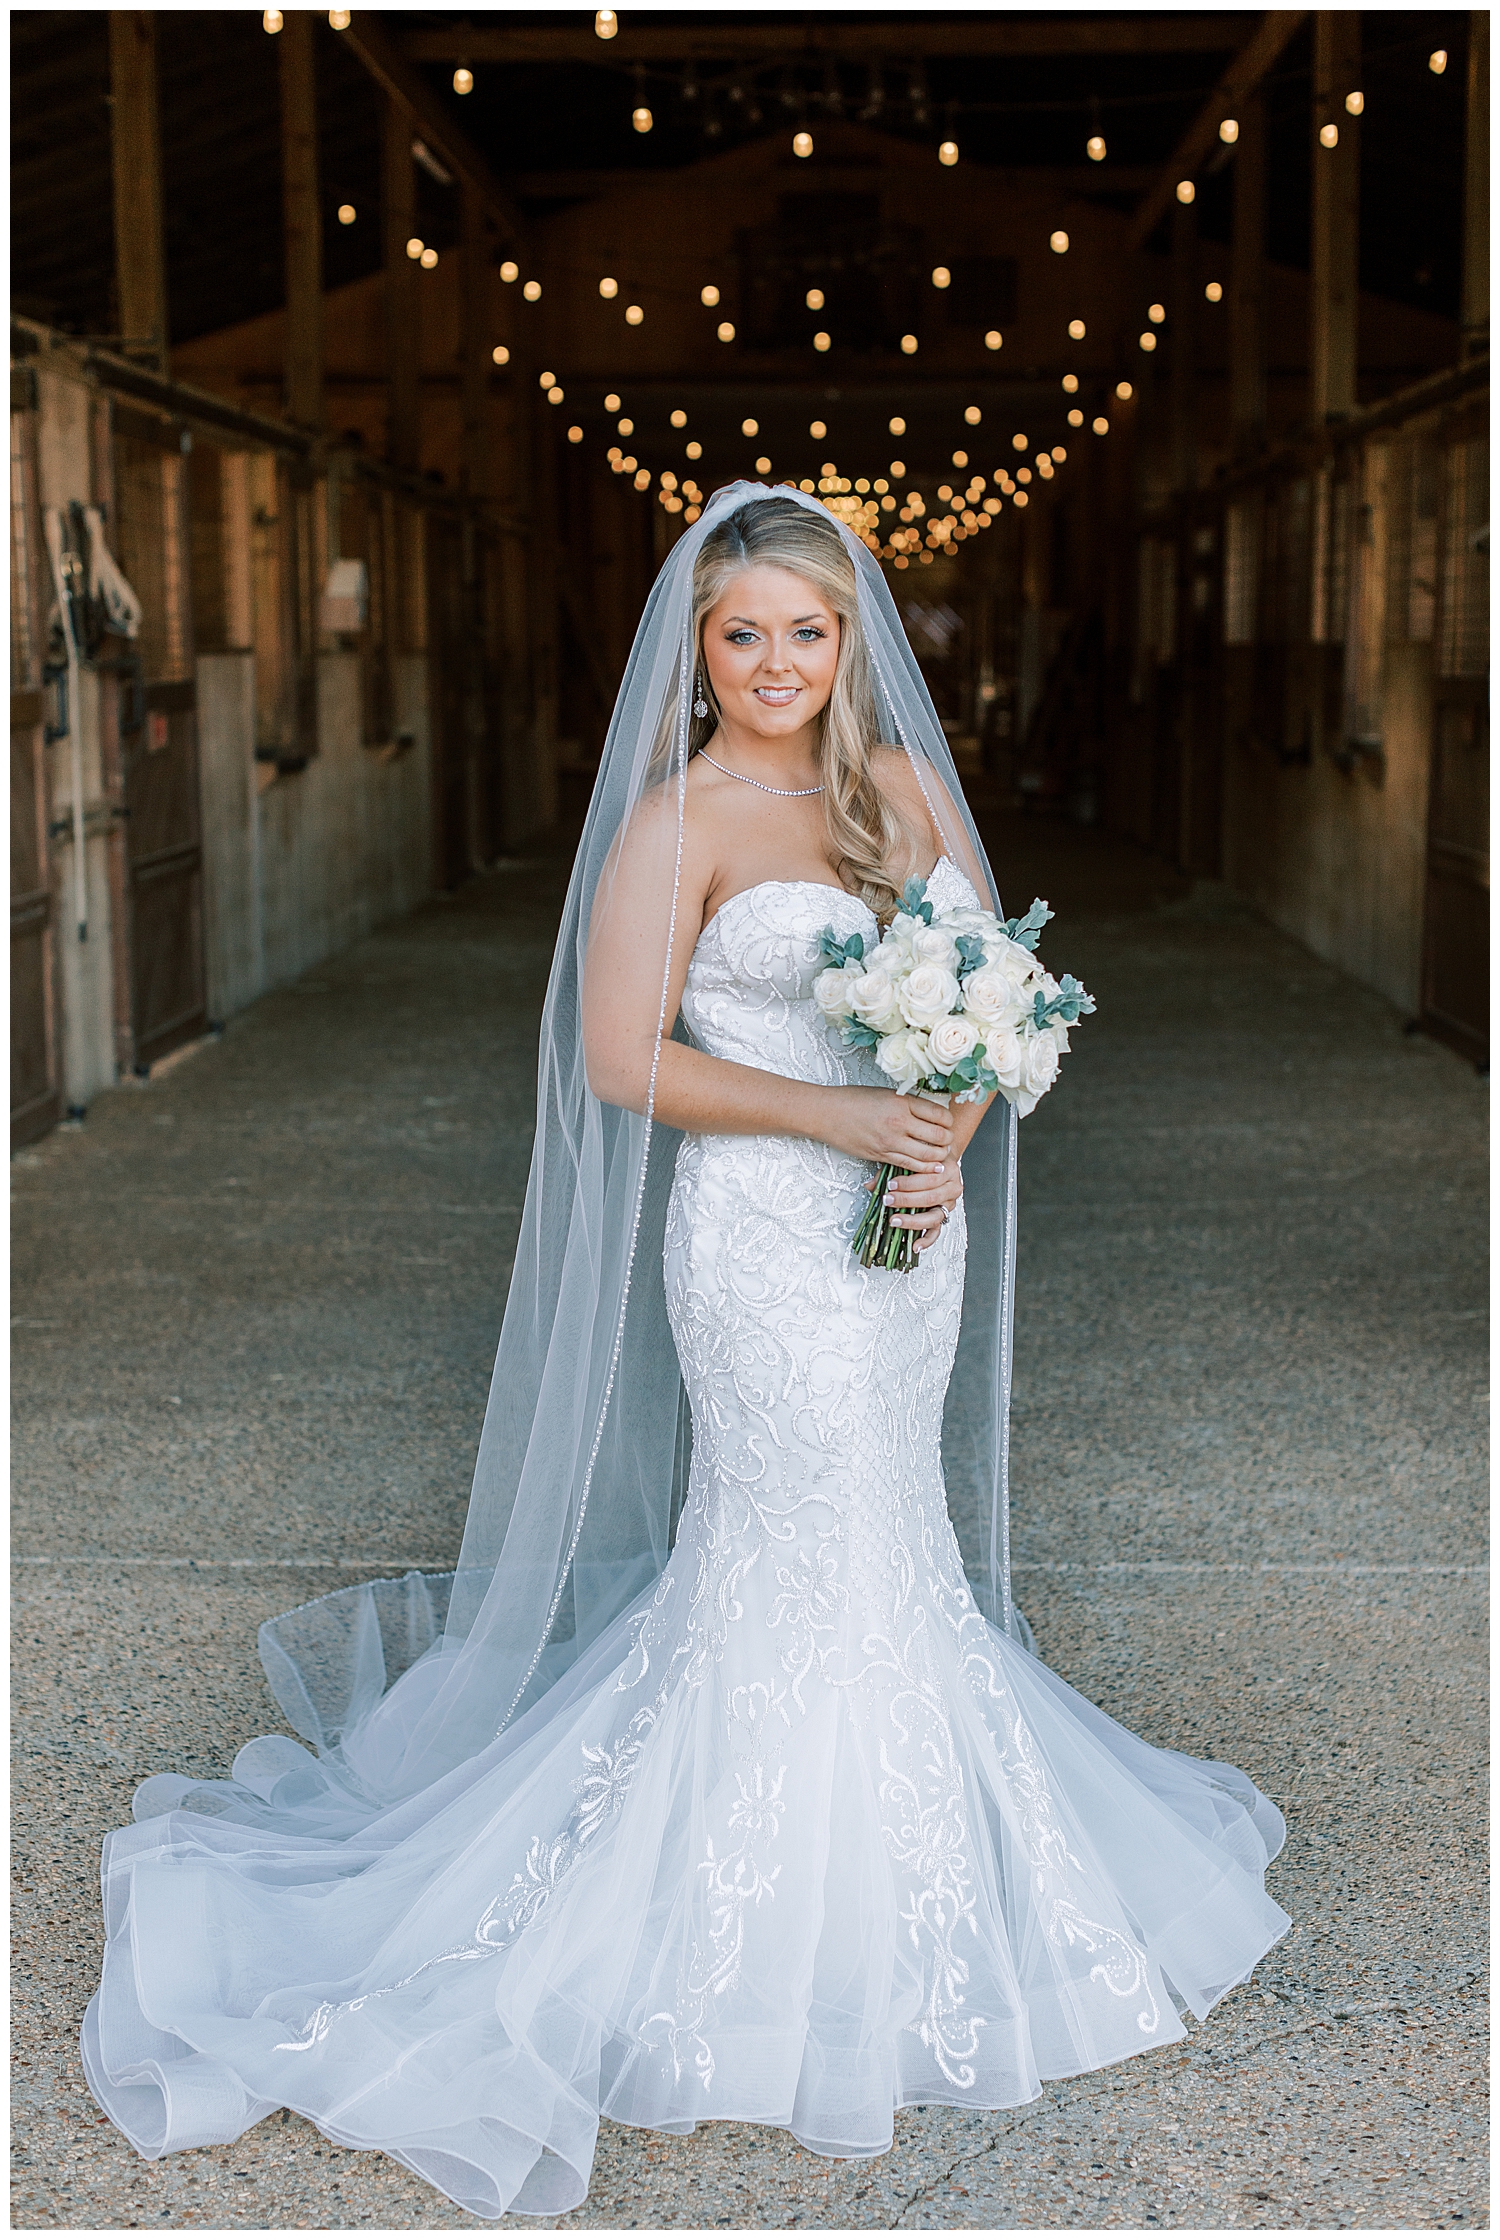 A bride stands in the stables at Sullivan Barn.